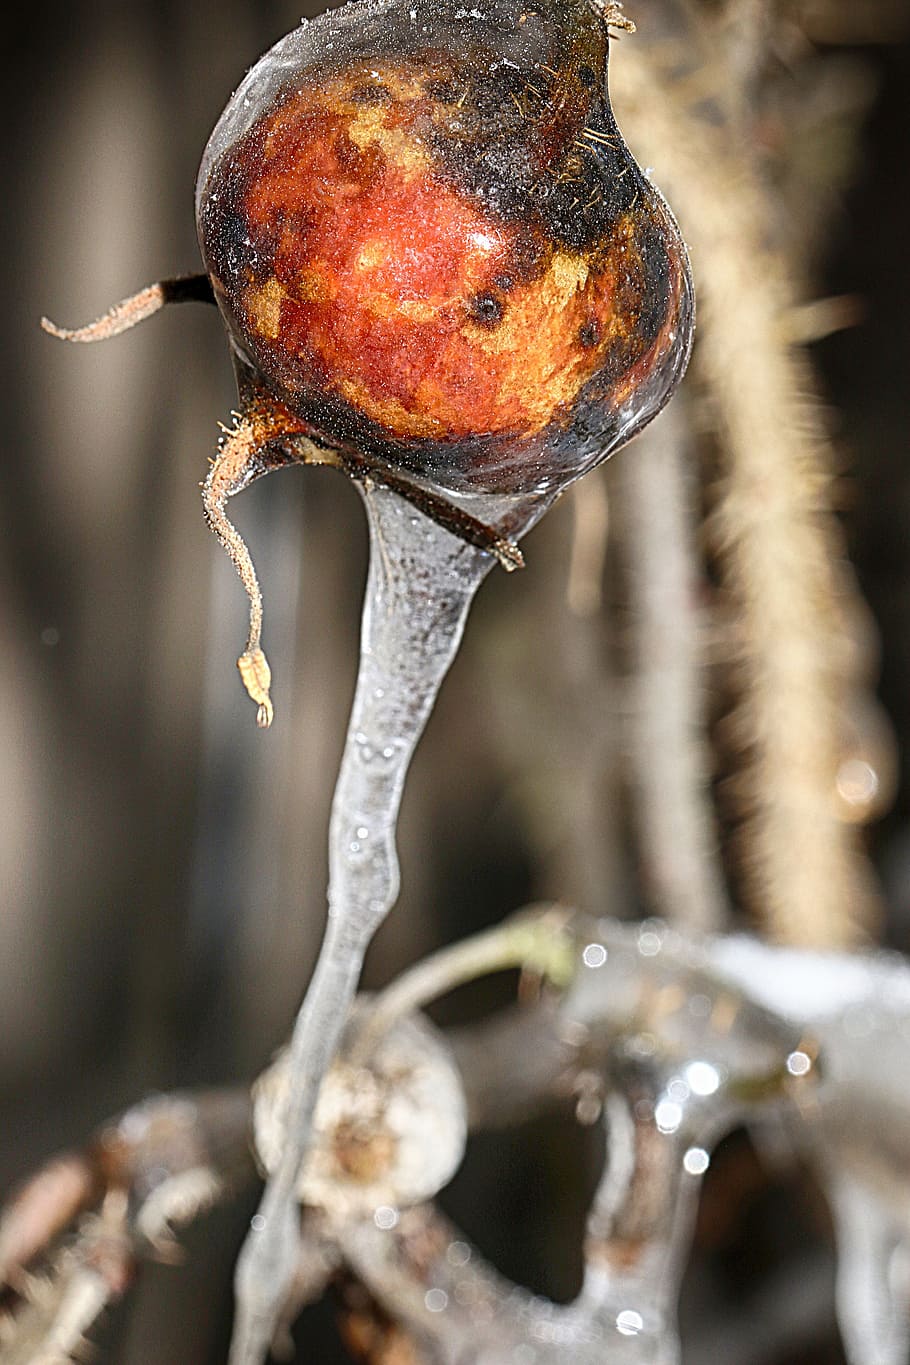 rose hip, icicle, nature, outdoors, closeup, frost, winter, close-up, focus on foreground, cold temperature